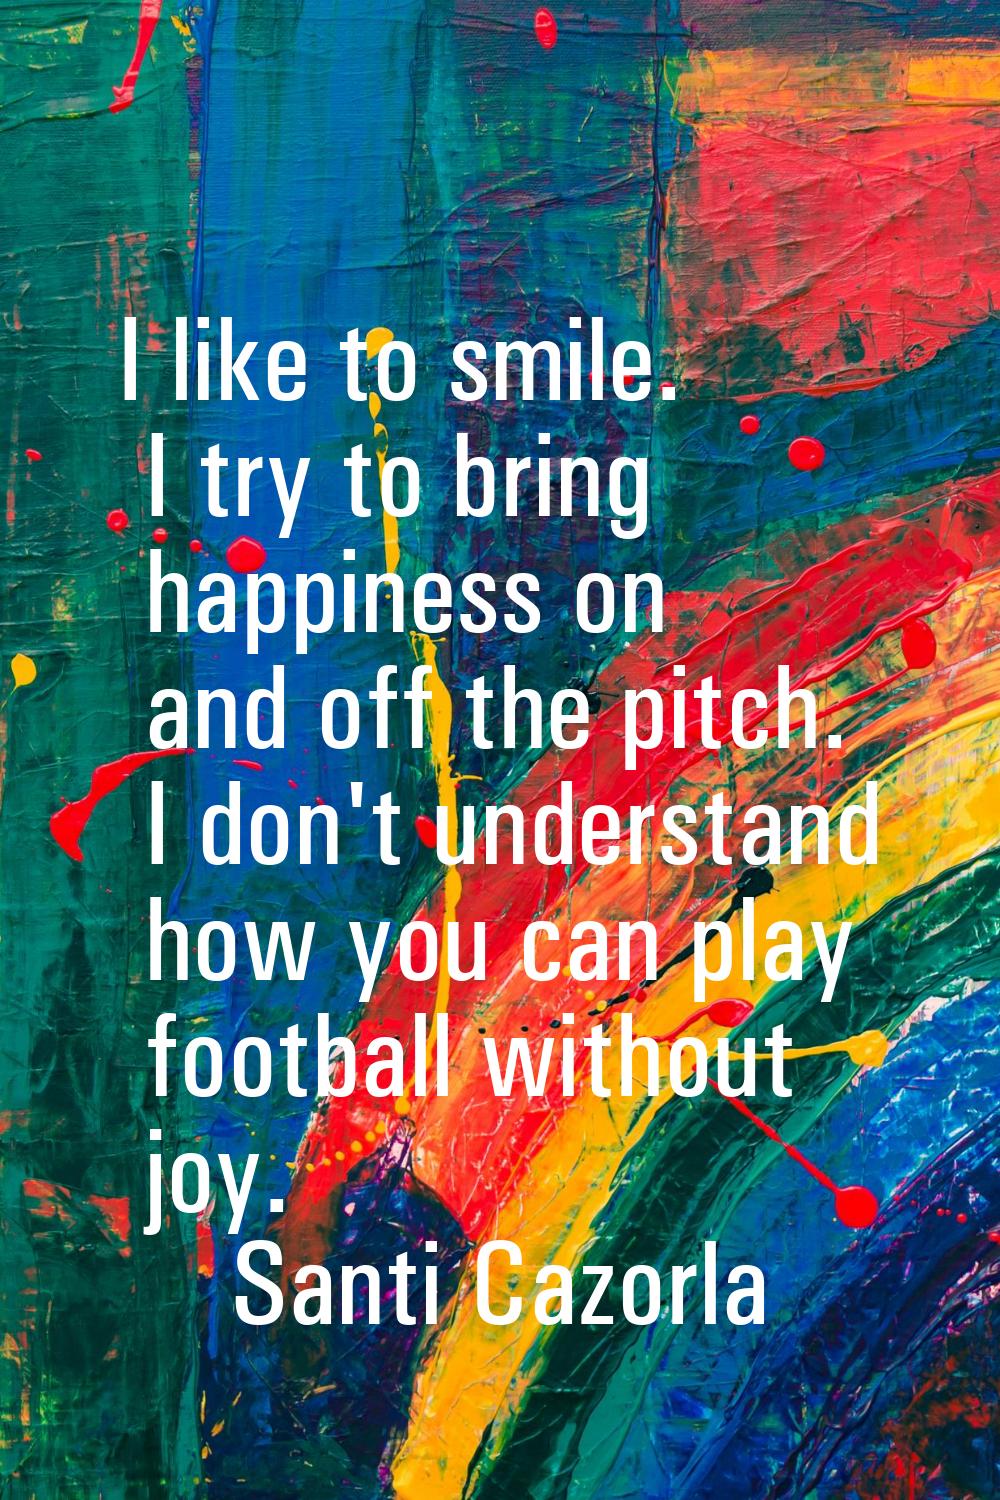 I like to smile. I try to bring happiness on and off the pitch. I don't understand how you can play